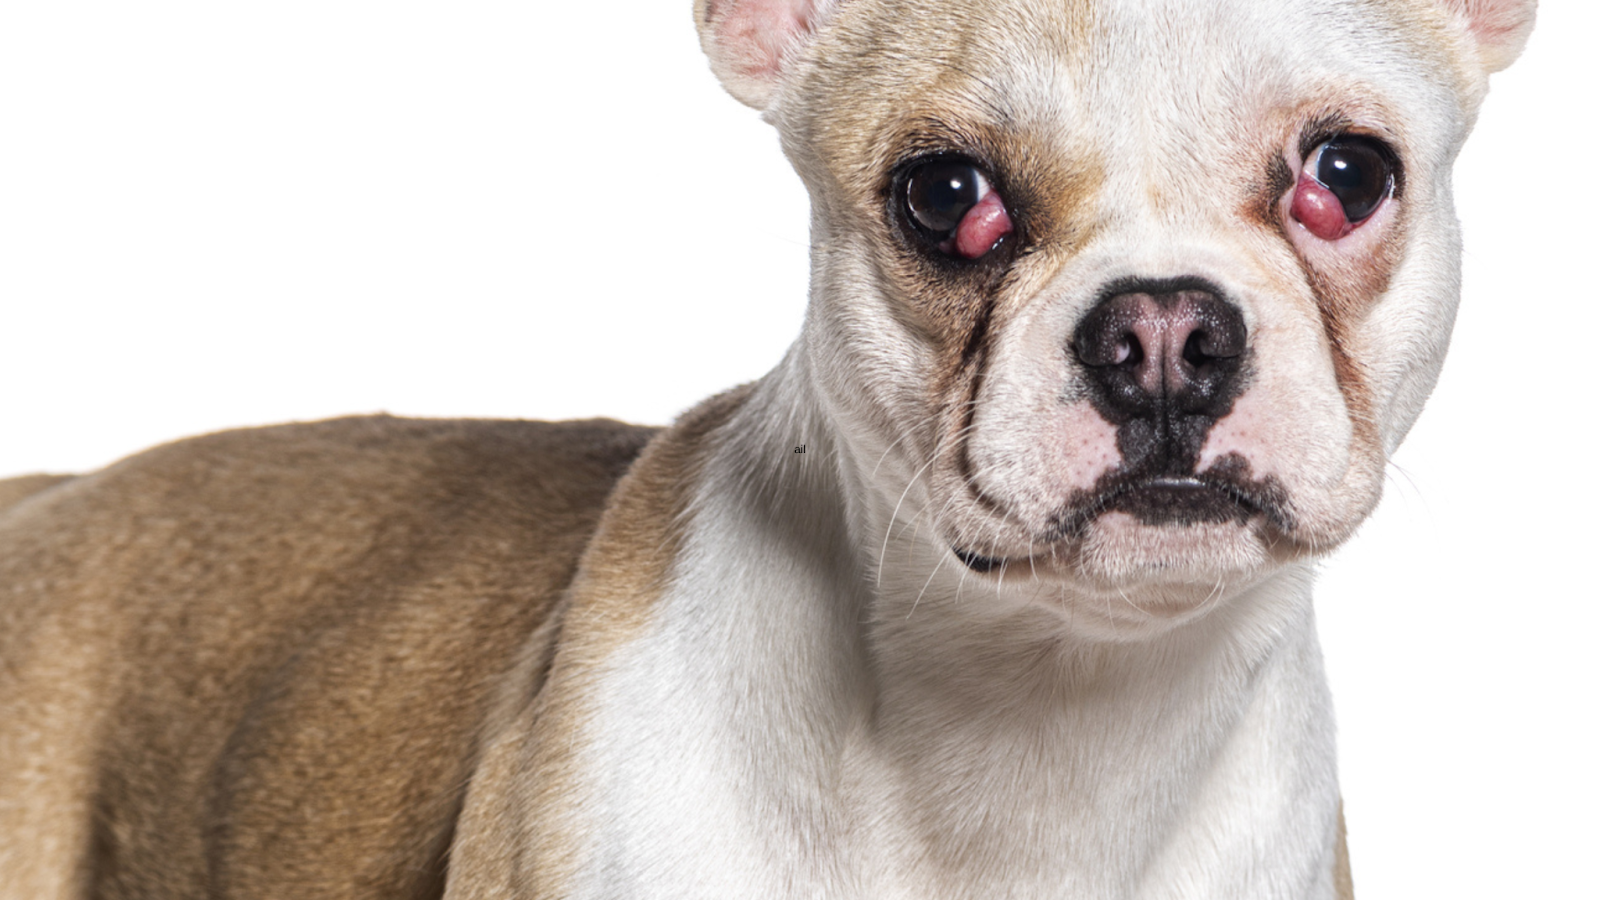 close up view of a Boston Terrier mix dog showing clear signs of cherry eye